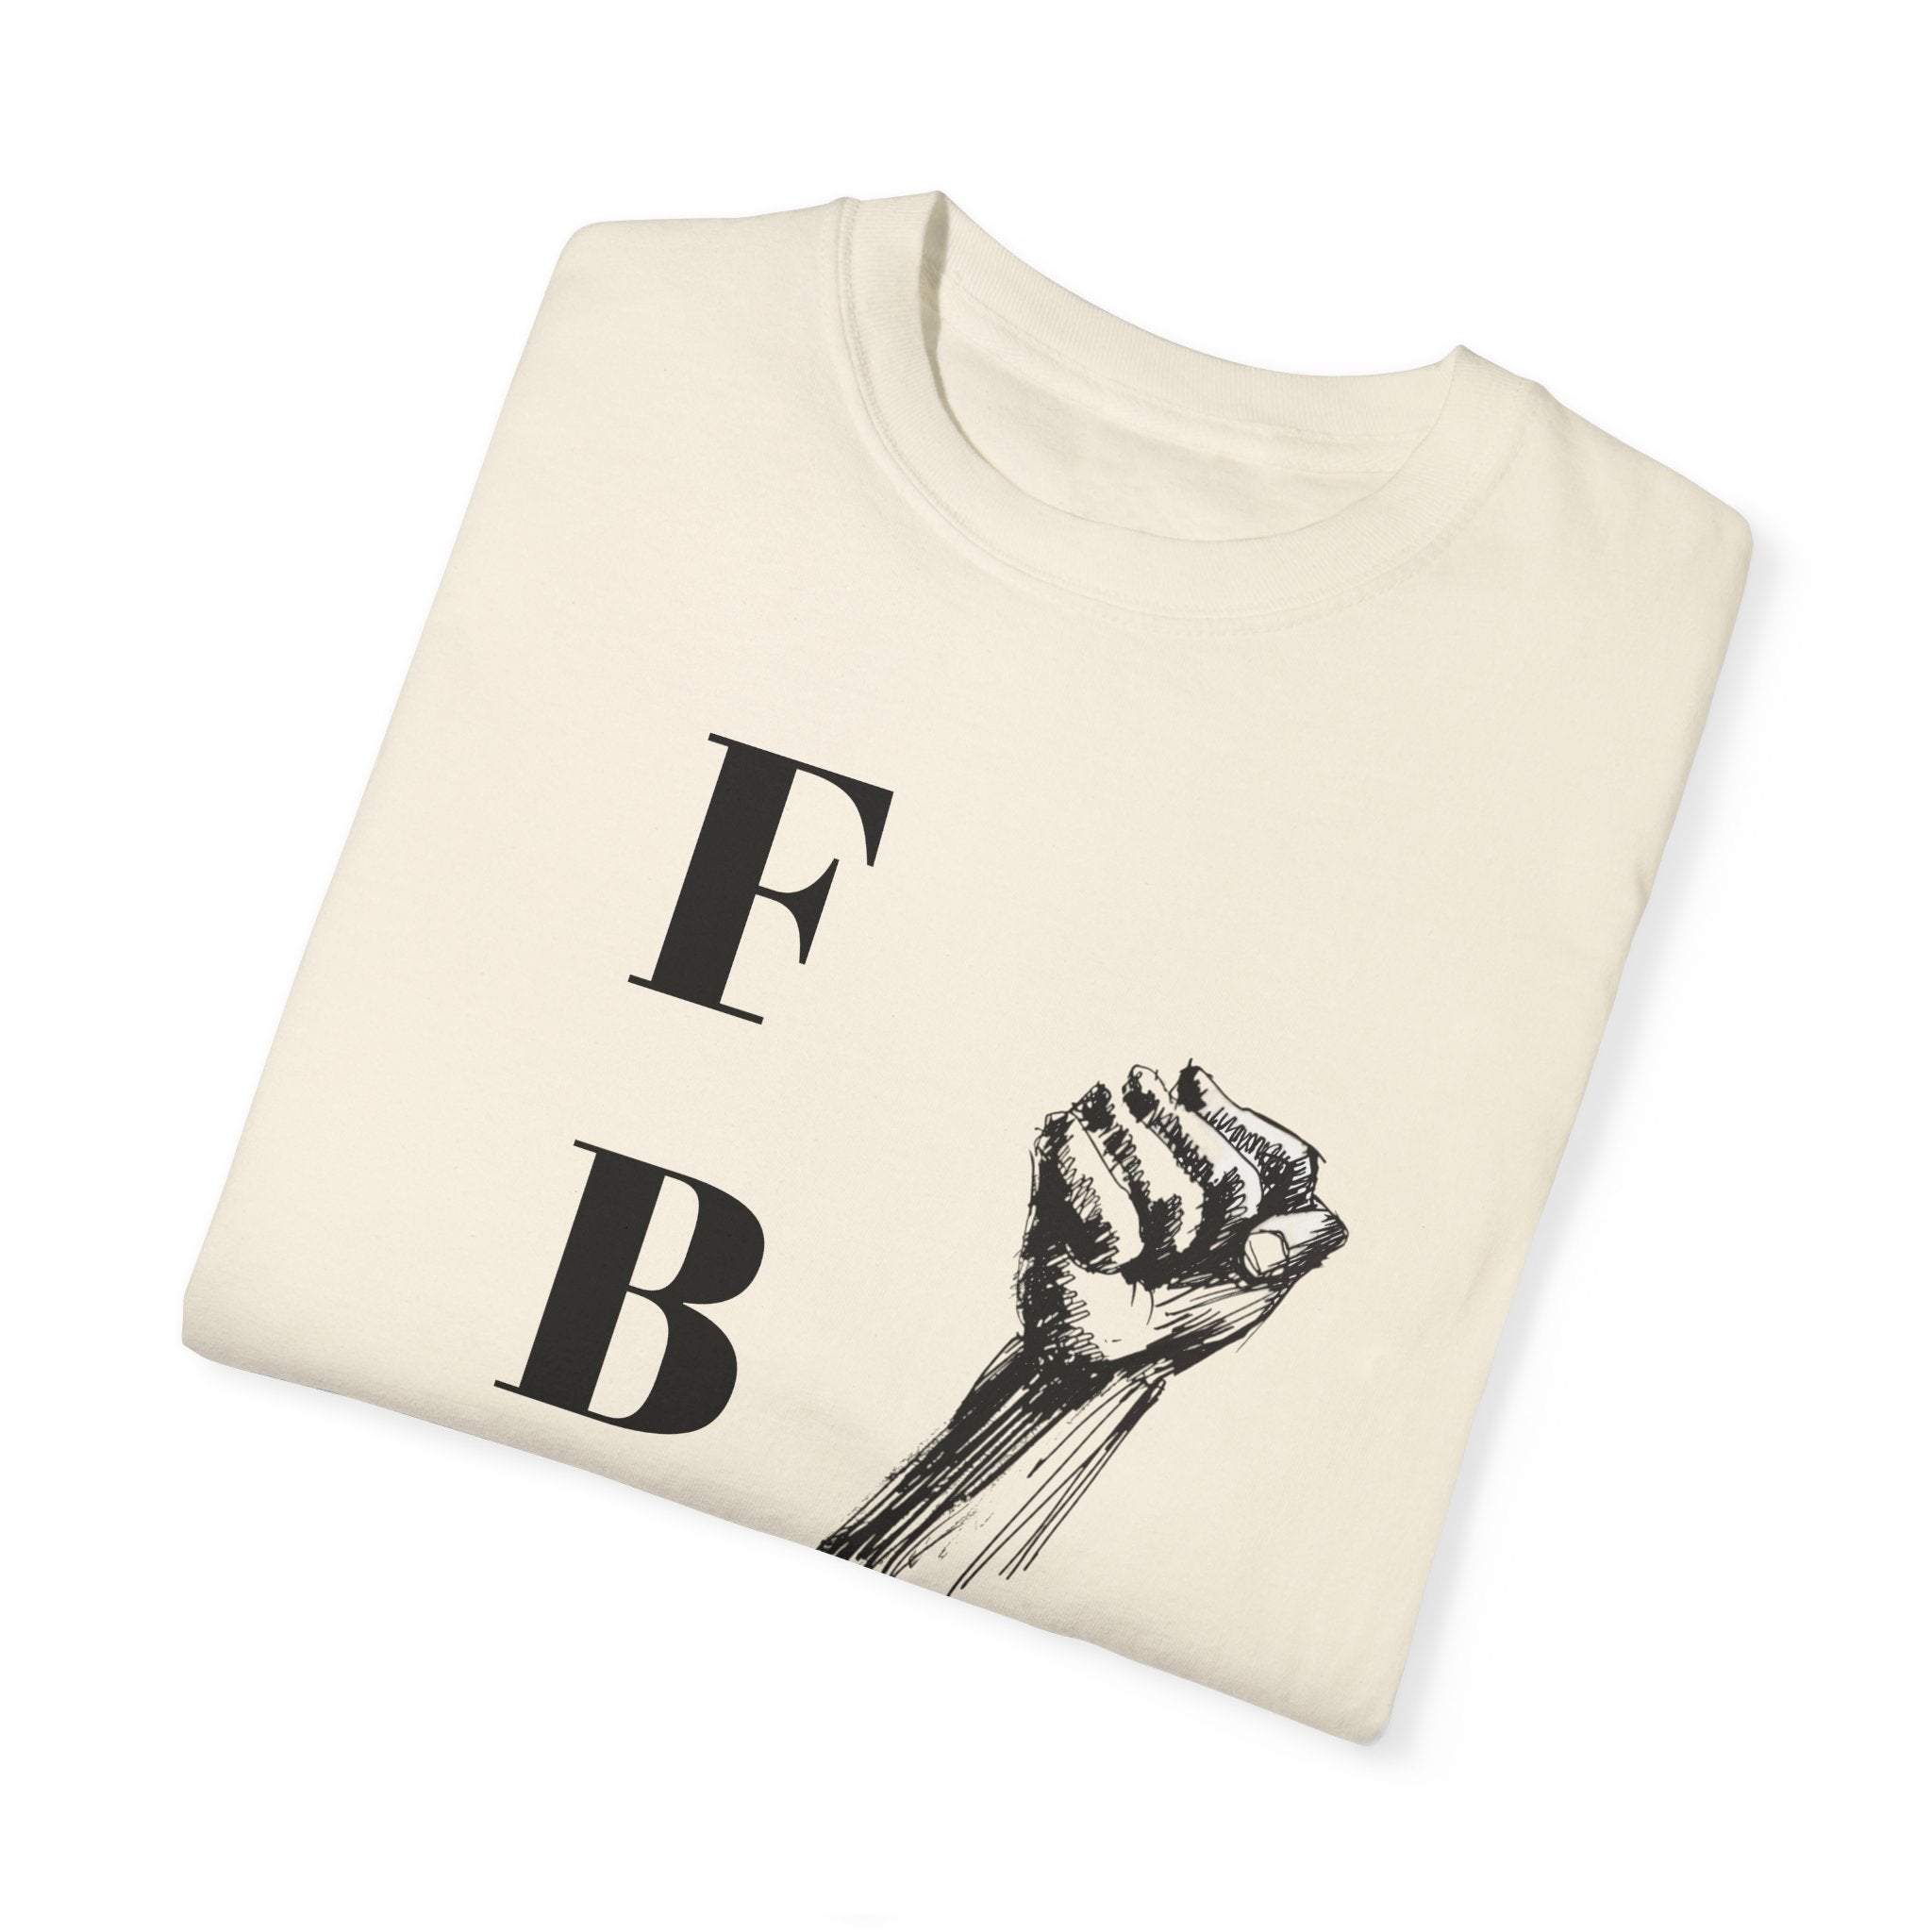 Heritage Pride: Foundational Black American (FBA) Unisex Garment-Dyed T-Shirt - Celebrate History and Identity